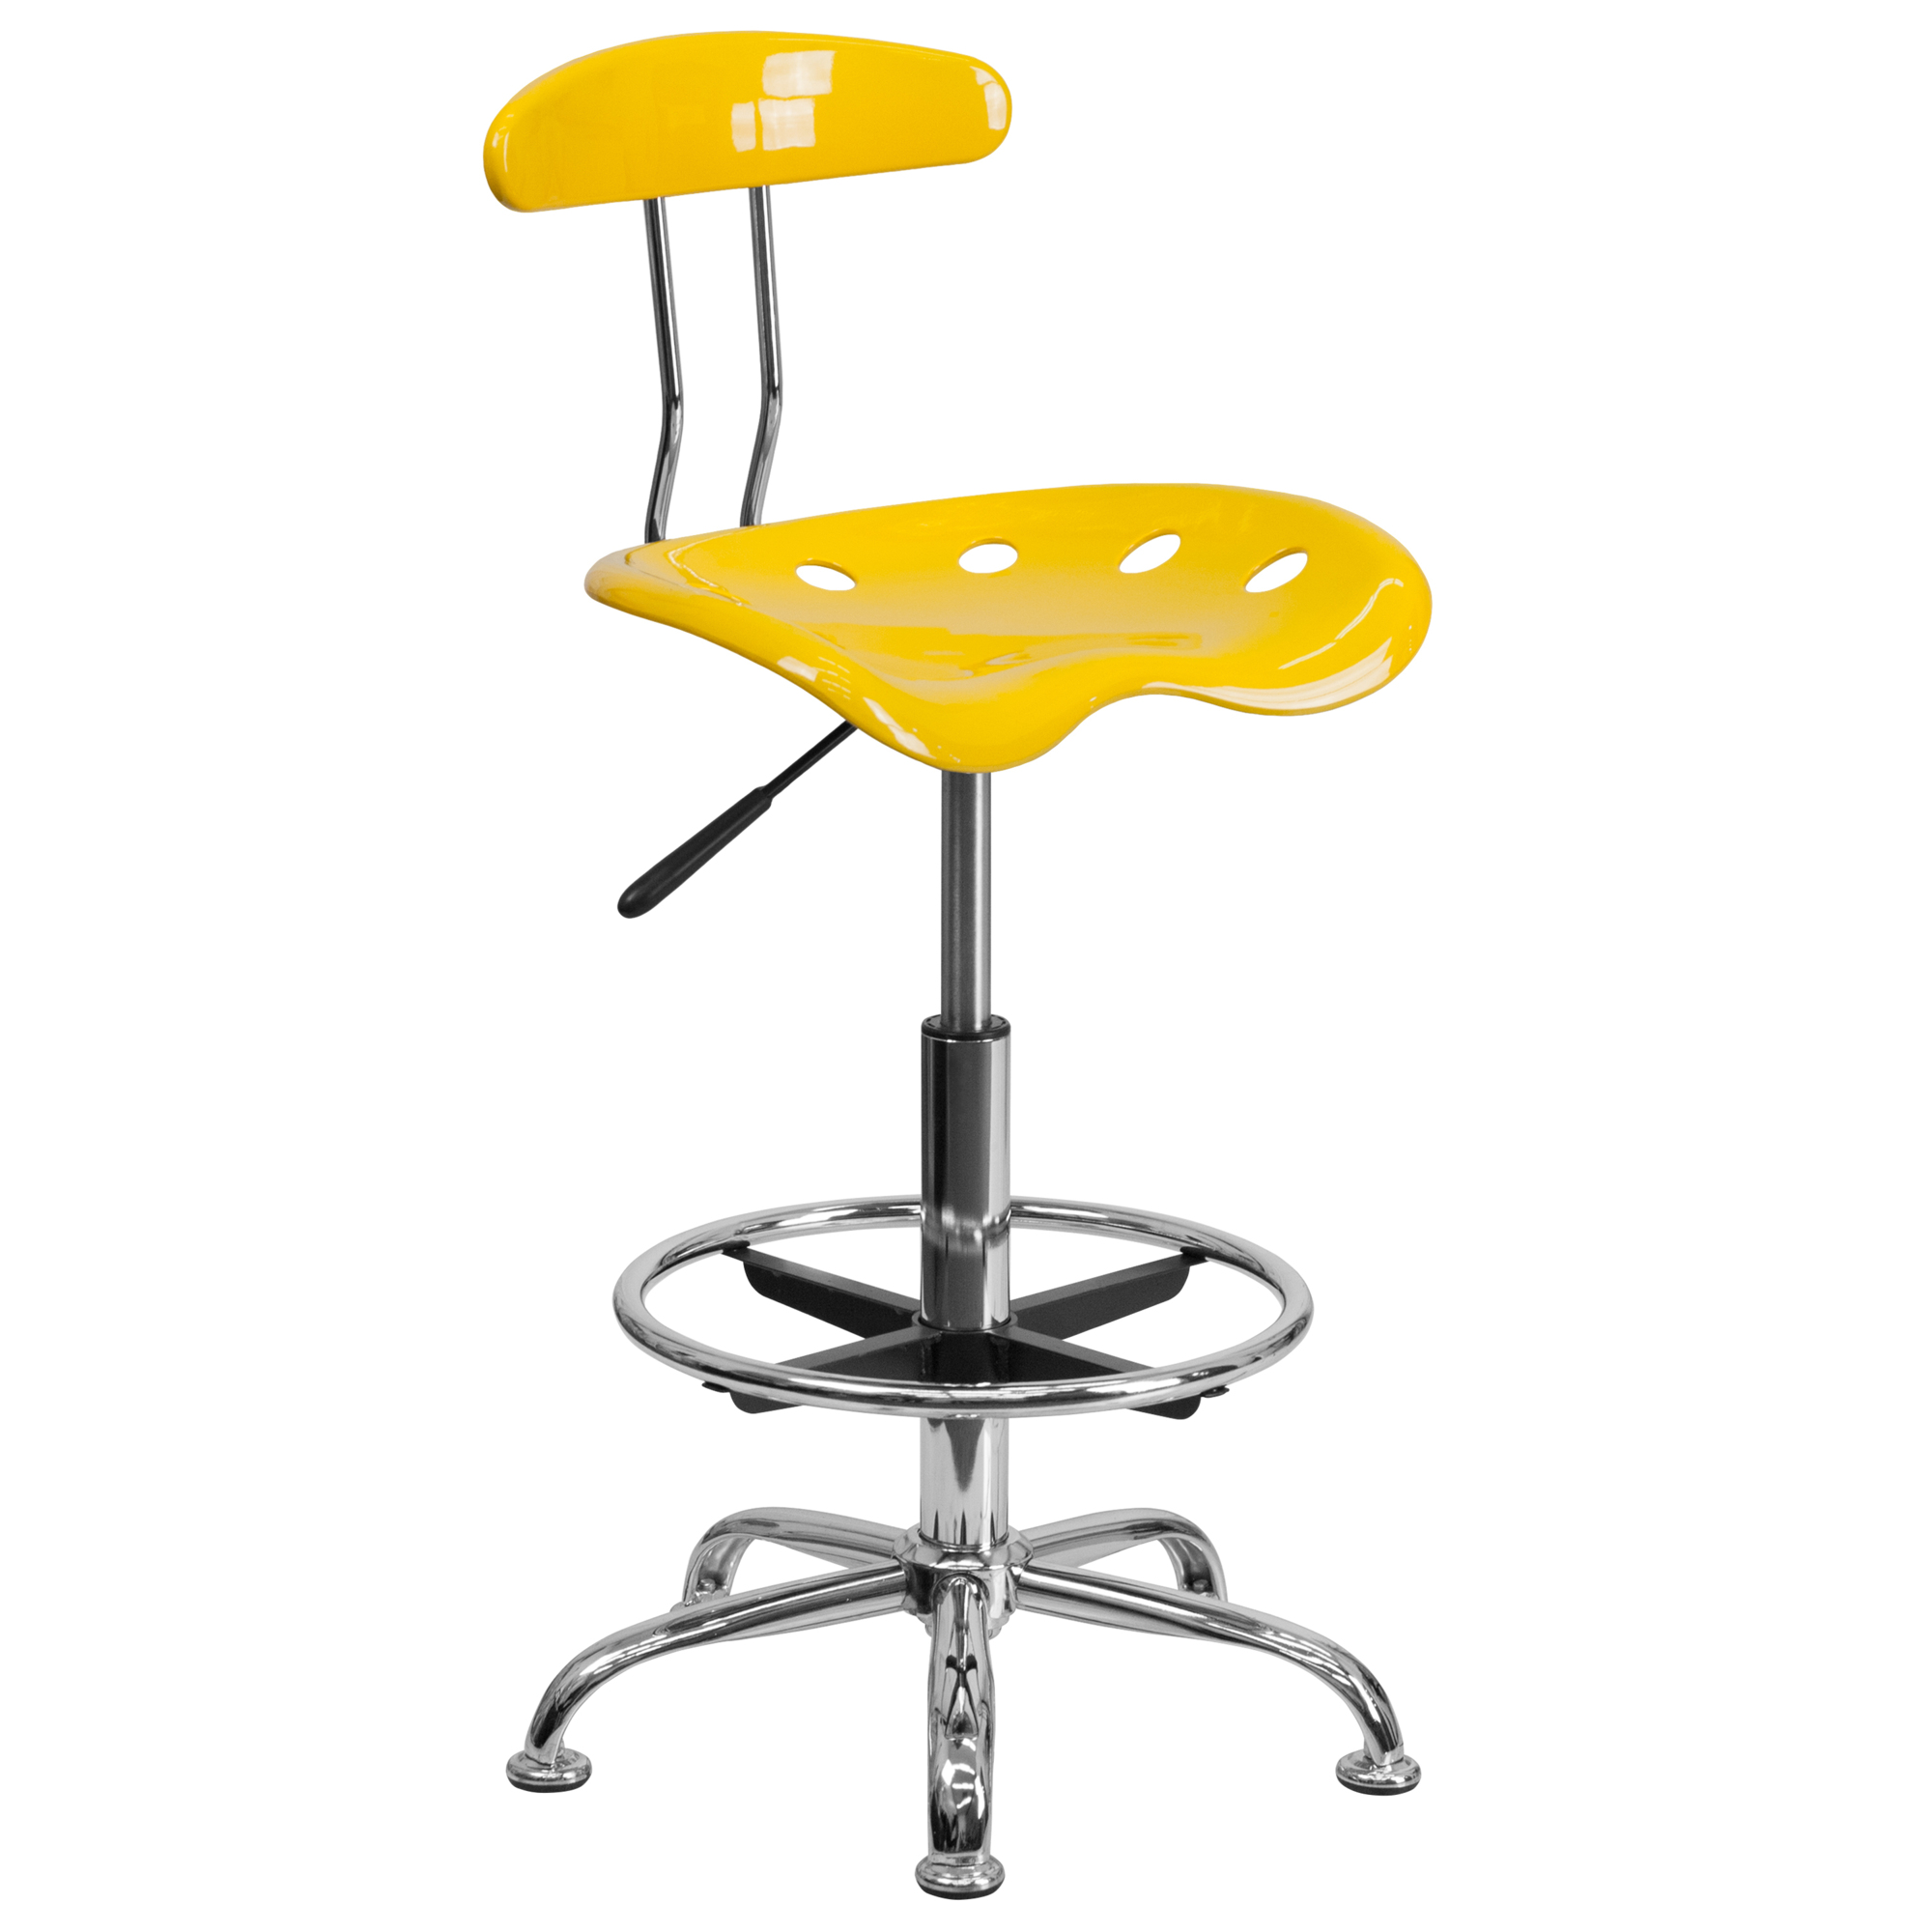 Flash Furniture, Vibrant Yellow and Chrome Drafting Stool, Primary Color Yellow, Included (qty.) 1, Model LF215YELLOW